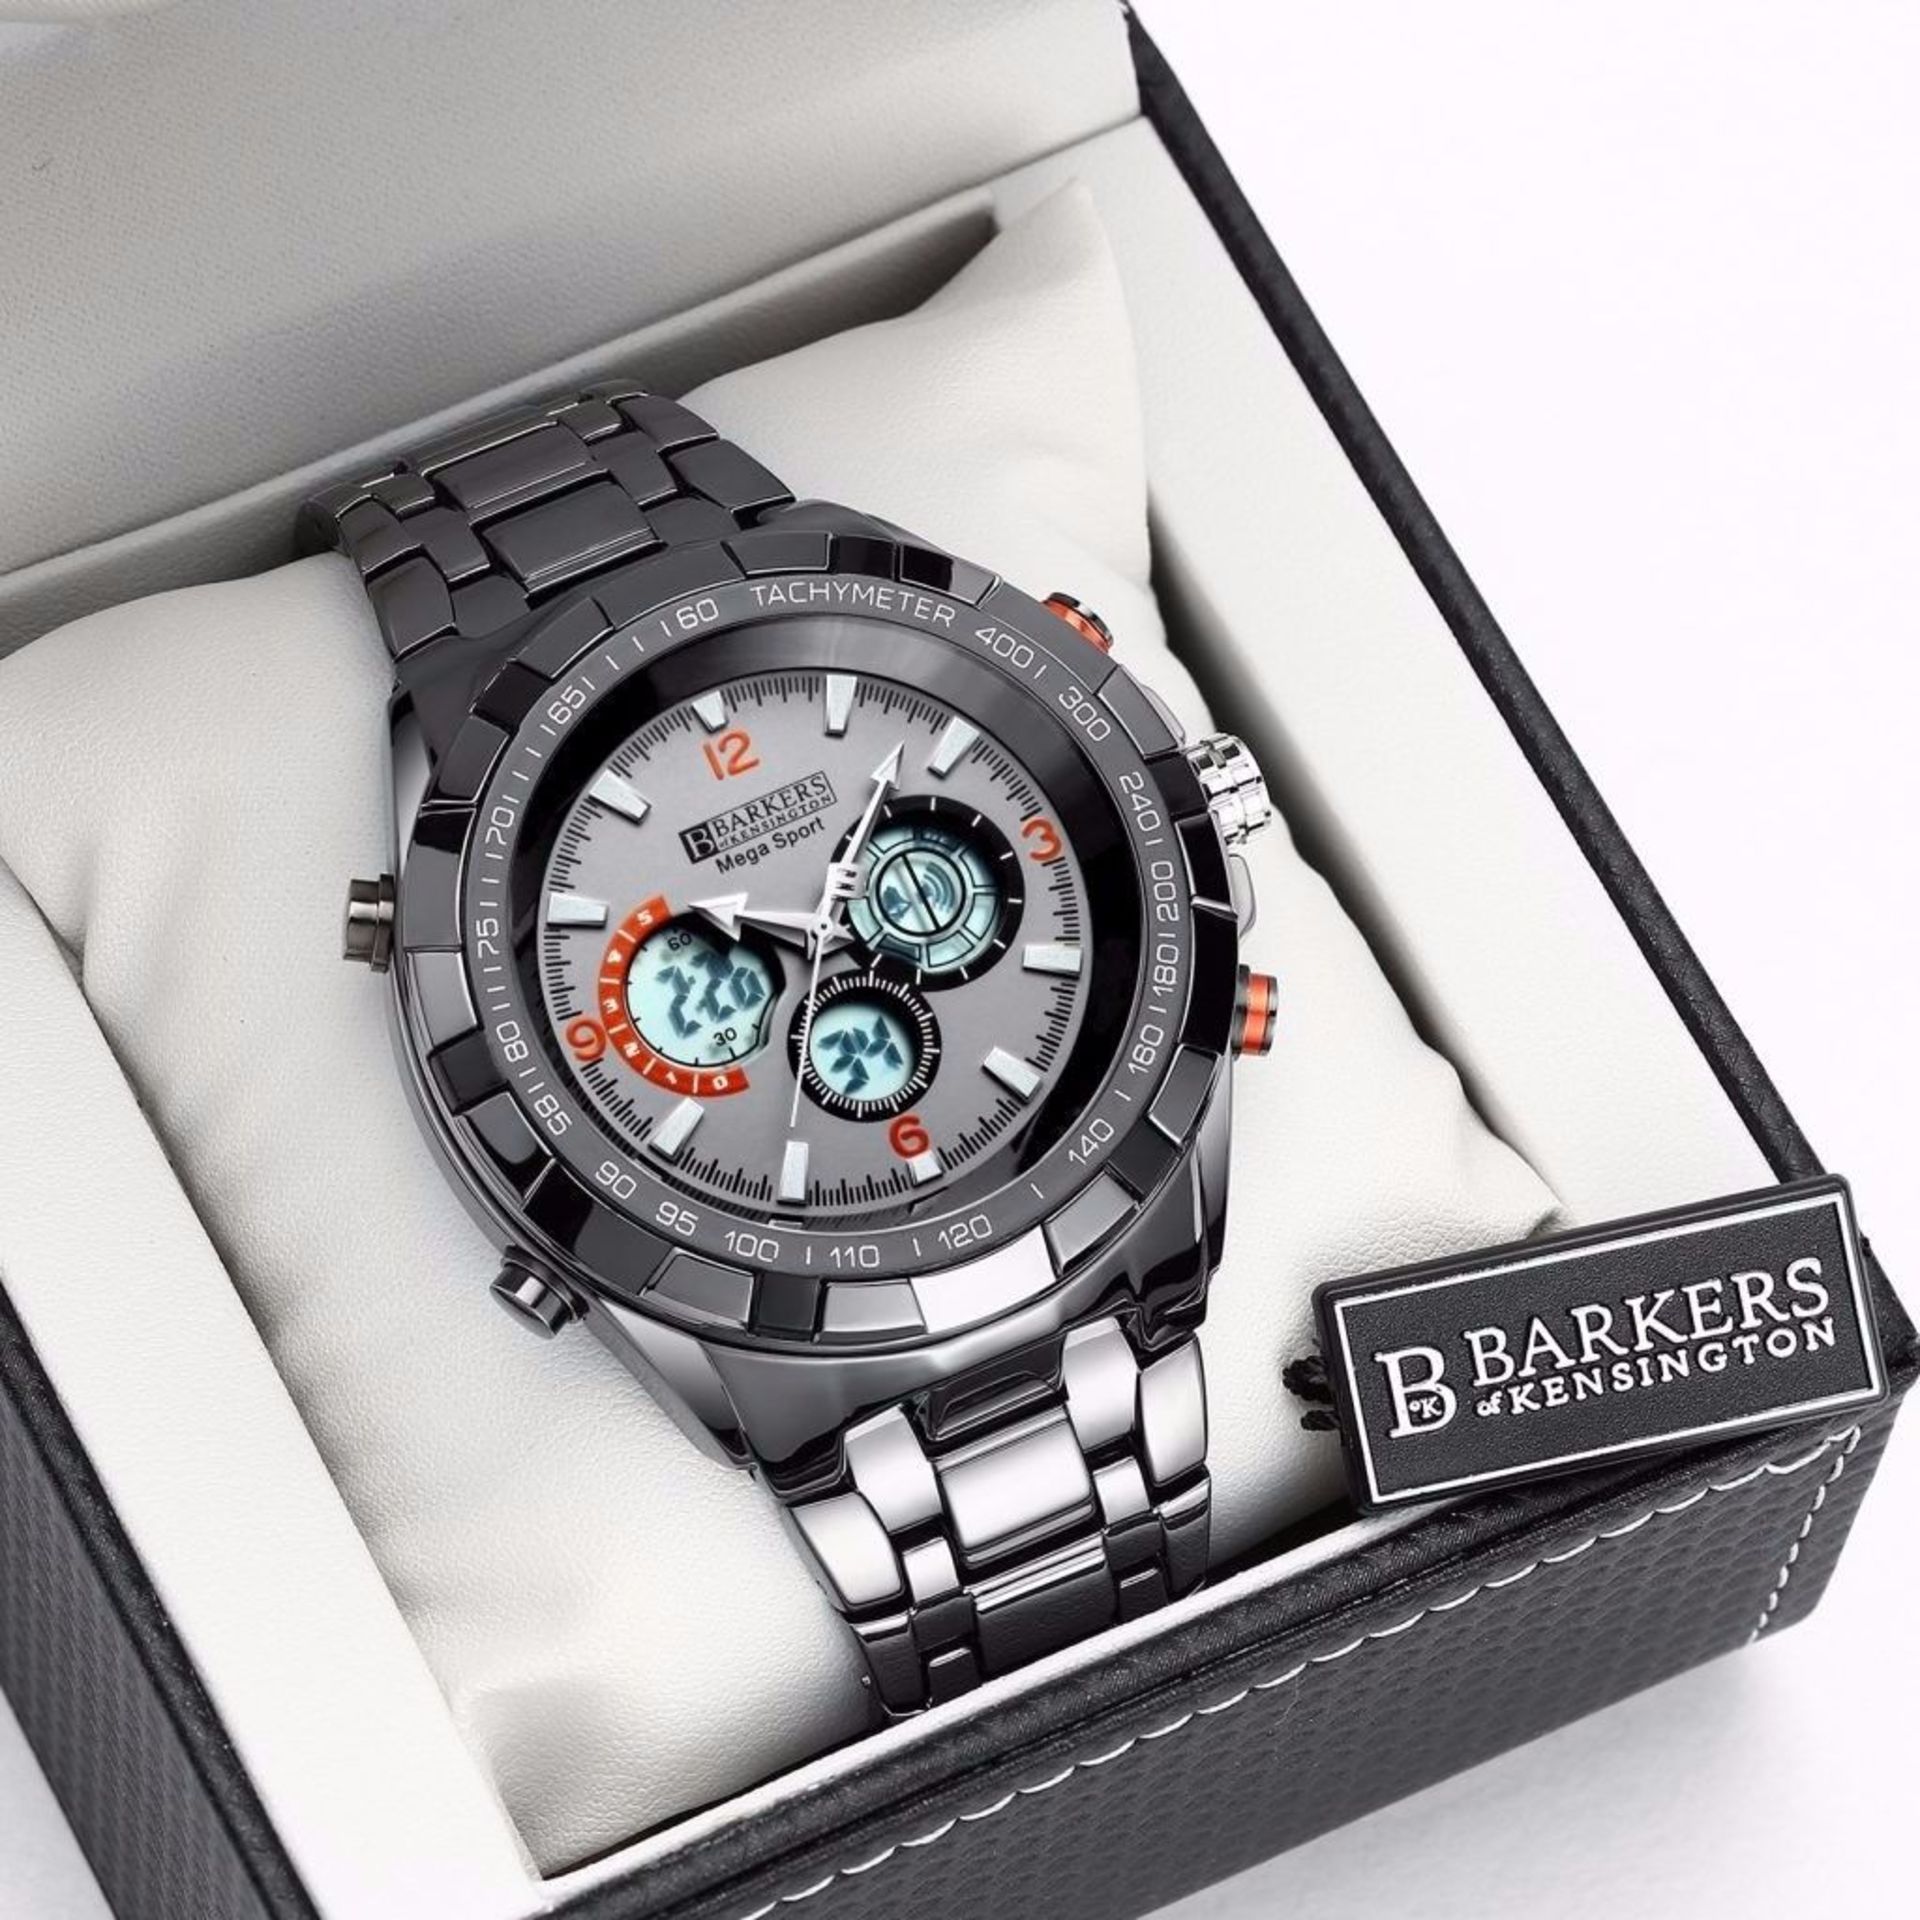 1 BRAND NEW BOXED BARKERS OF KENSINGTON MEGA SPORT WATCH IN GREY RRP £460.00 COMES WITH 5 YEAR